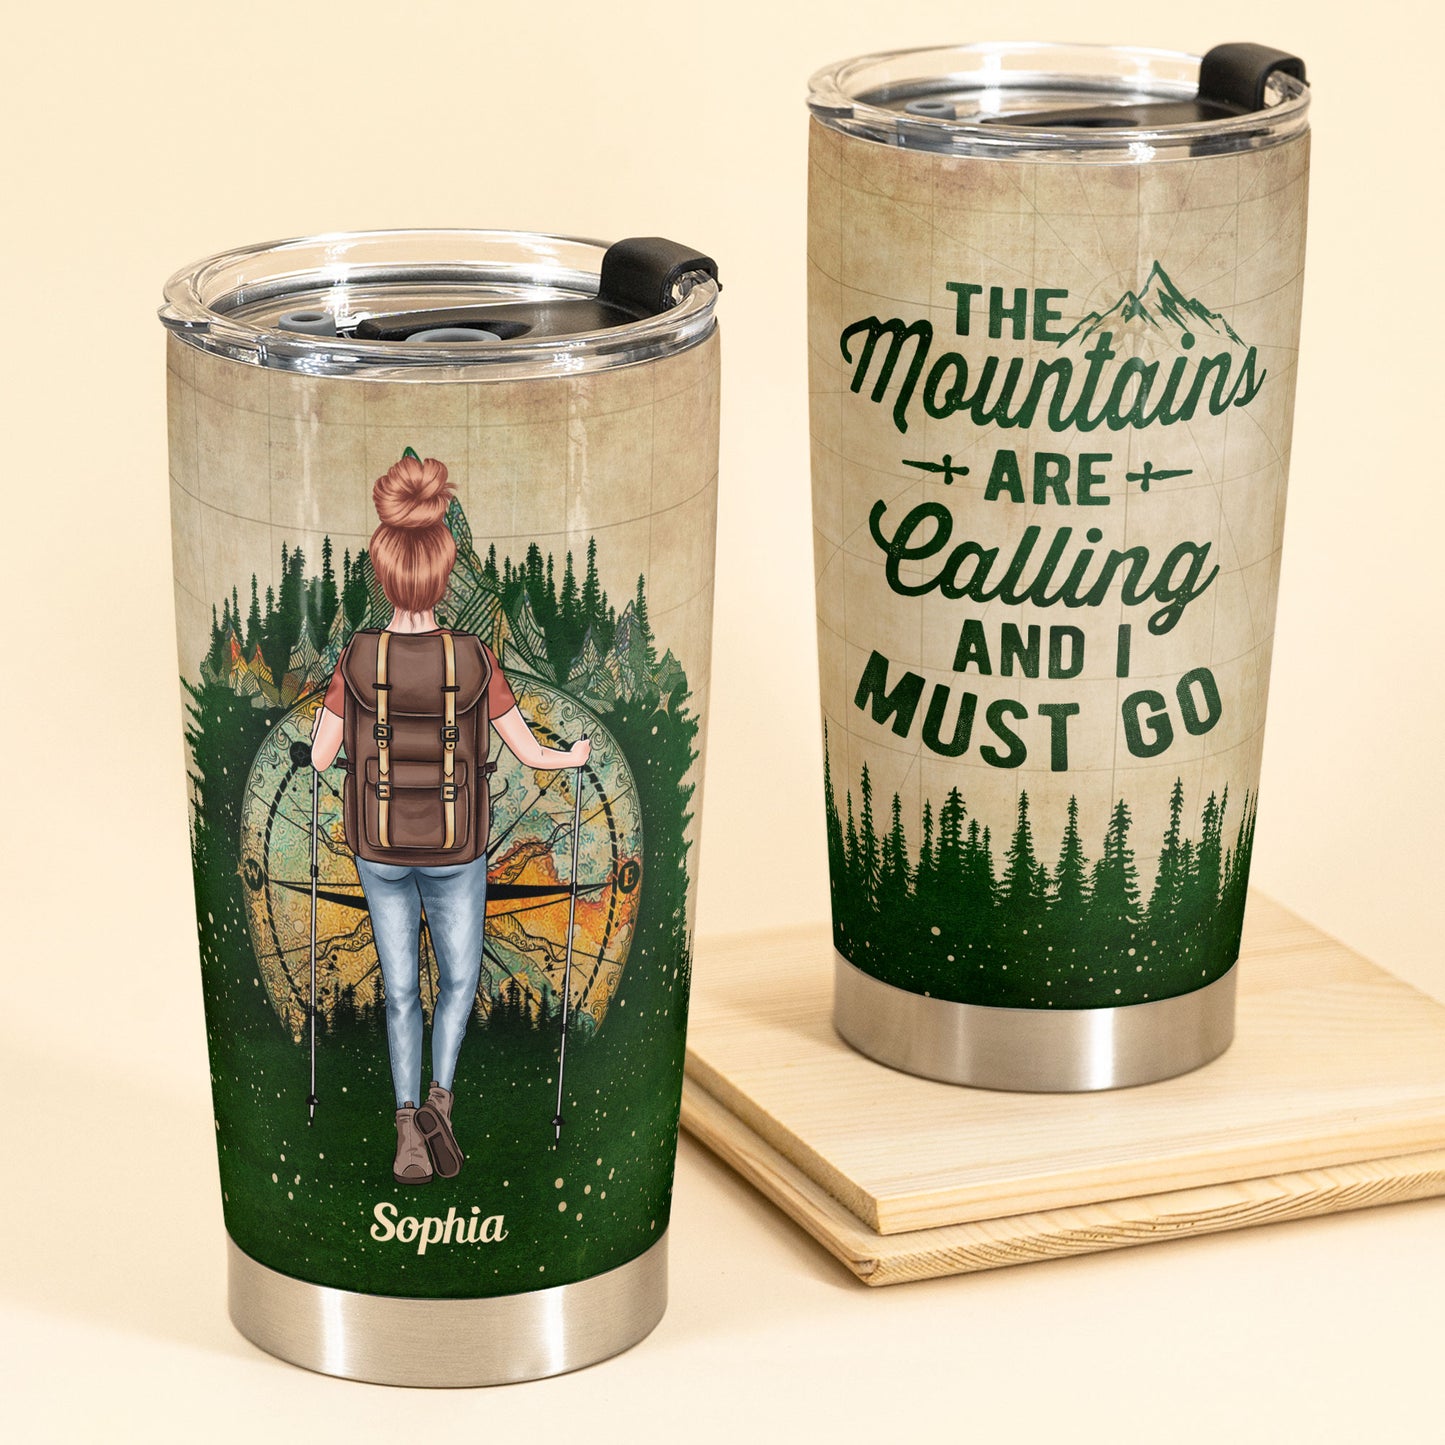 The Mountain Are Calling - Personalized Tumbler Cup - Birthday Gift For Camper, Hiker, Outdoor Enthusiast